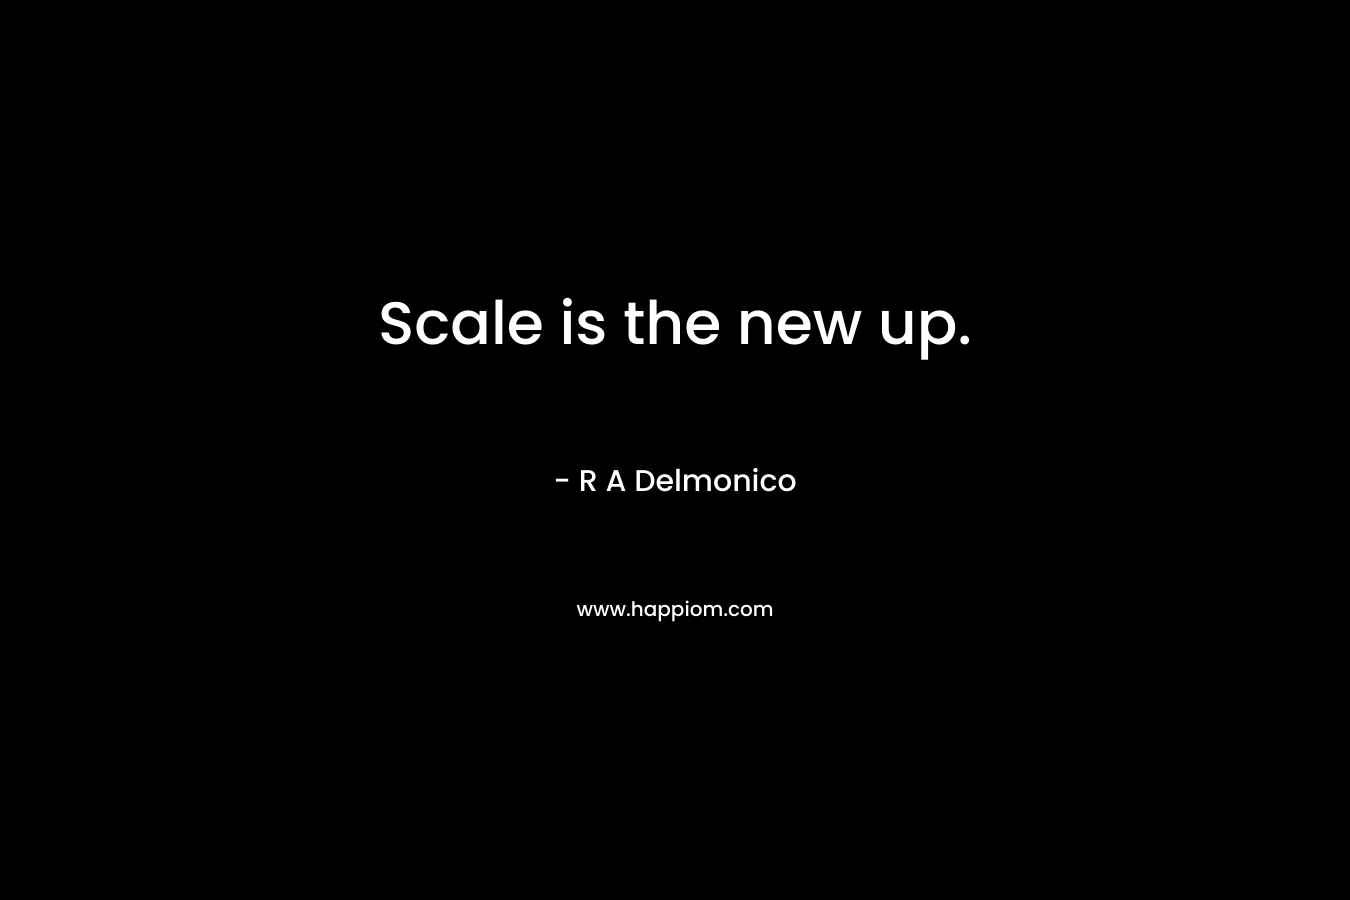 Scale is the new up.